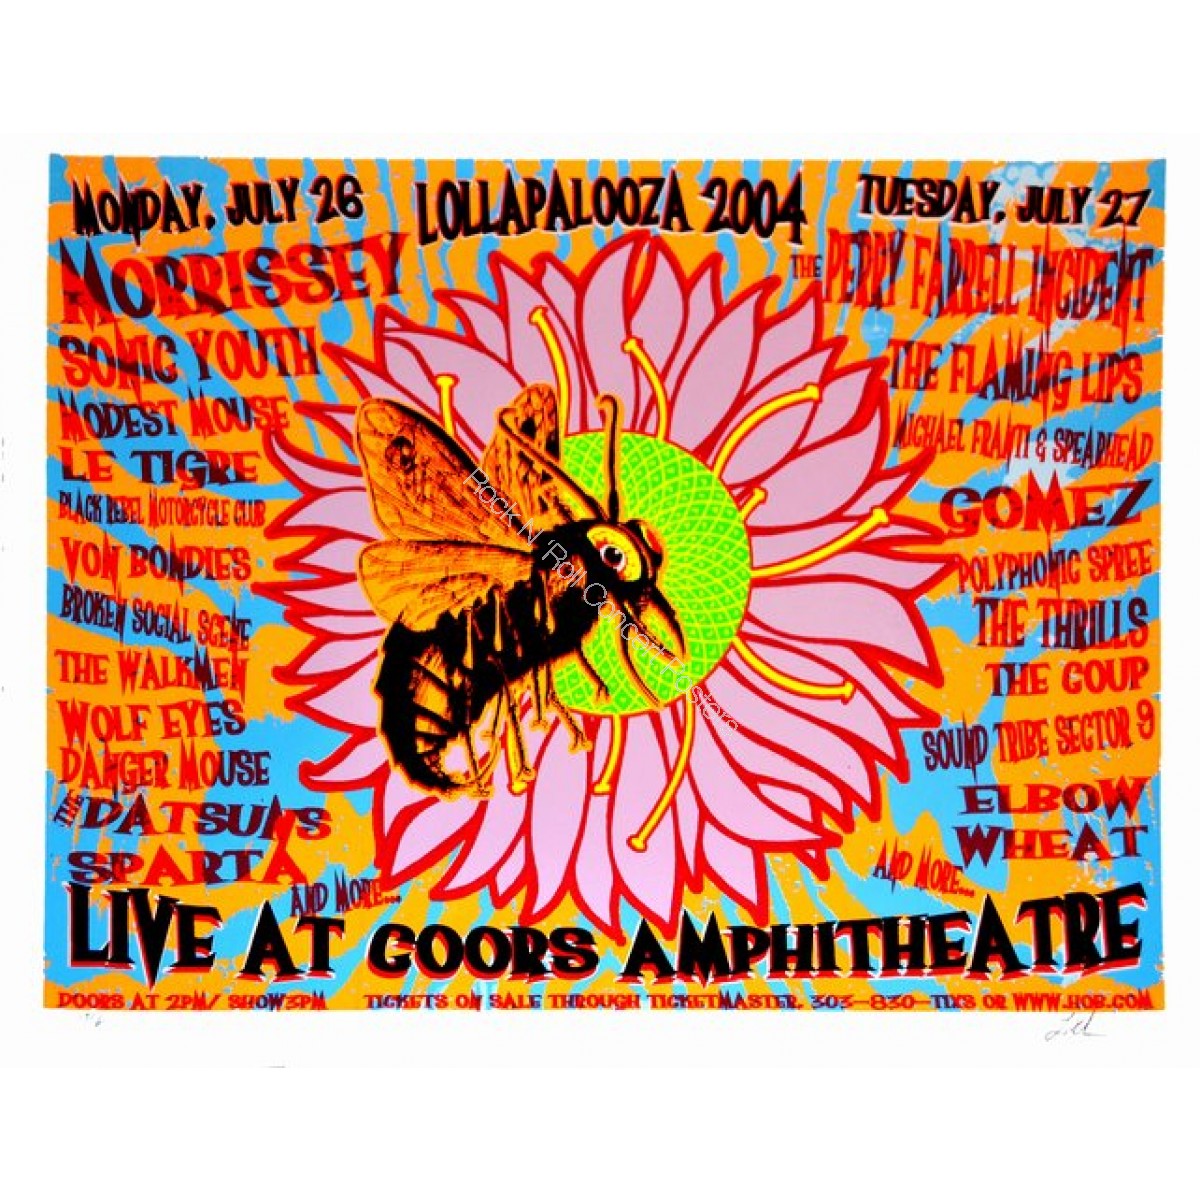 Lollapalooza Coors Amphitheatre 2004 Official print